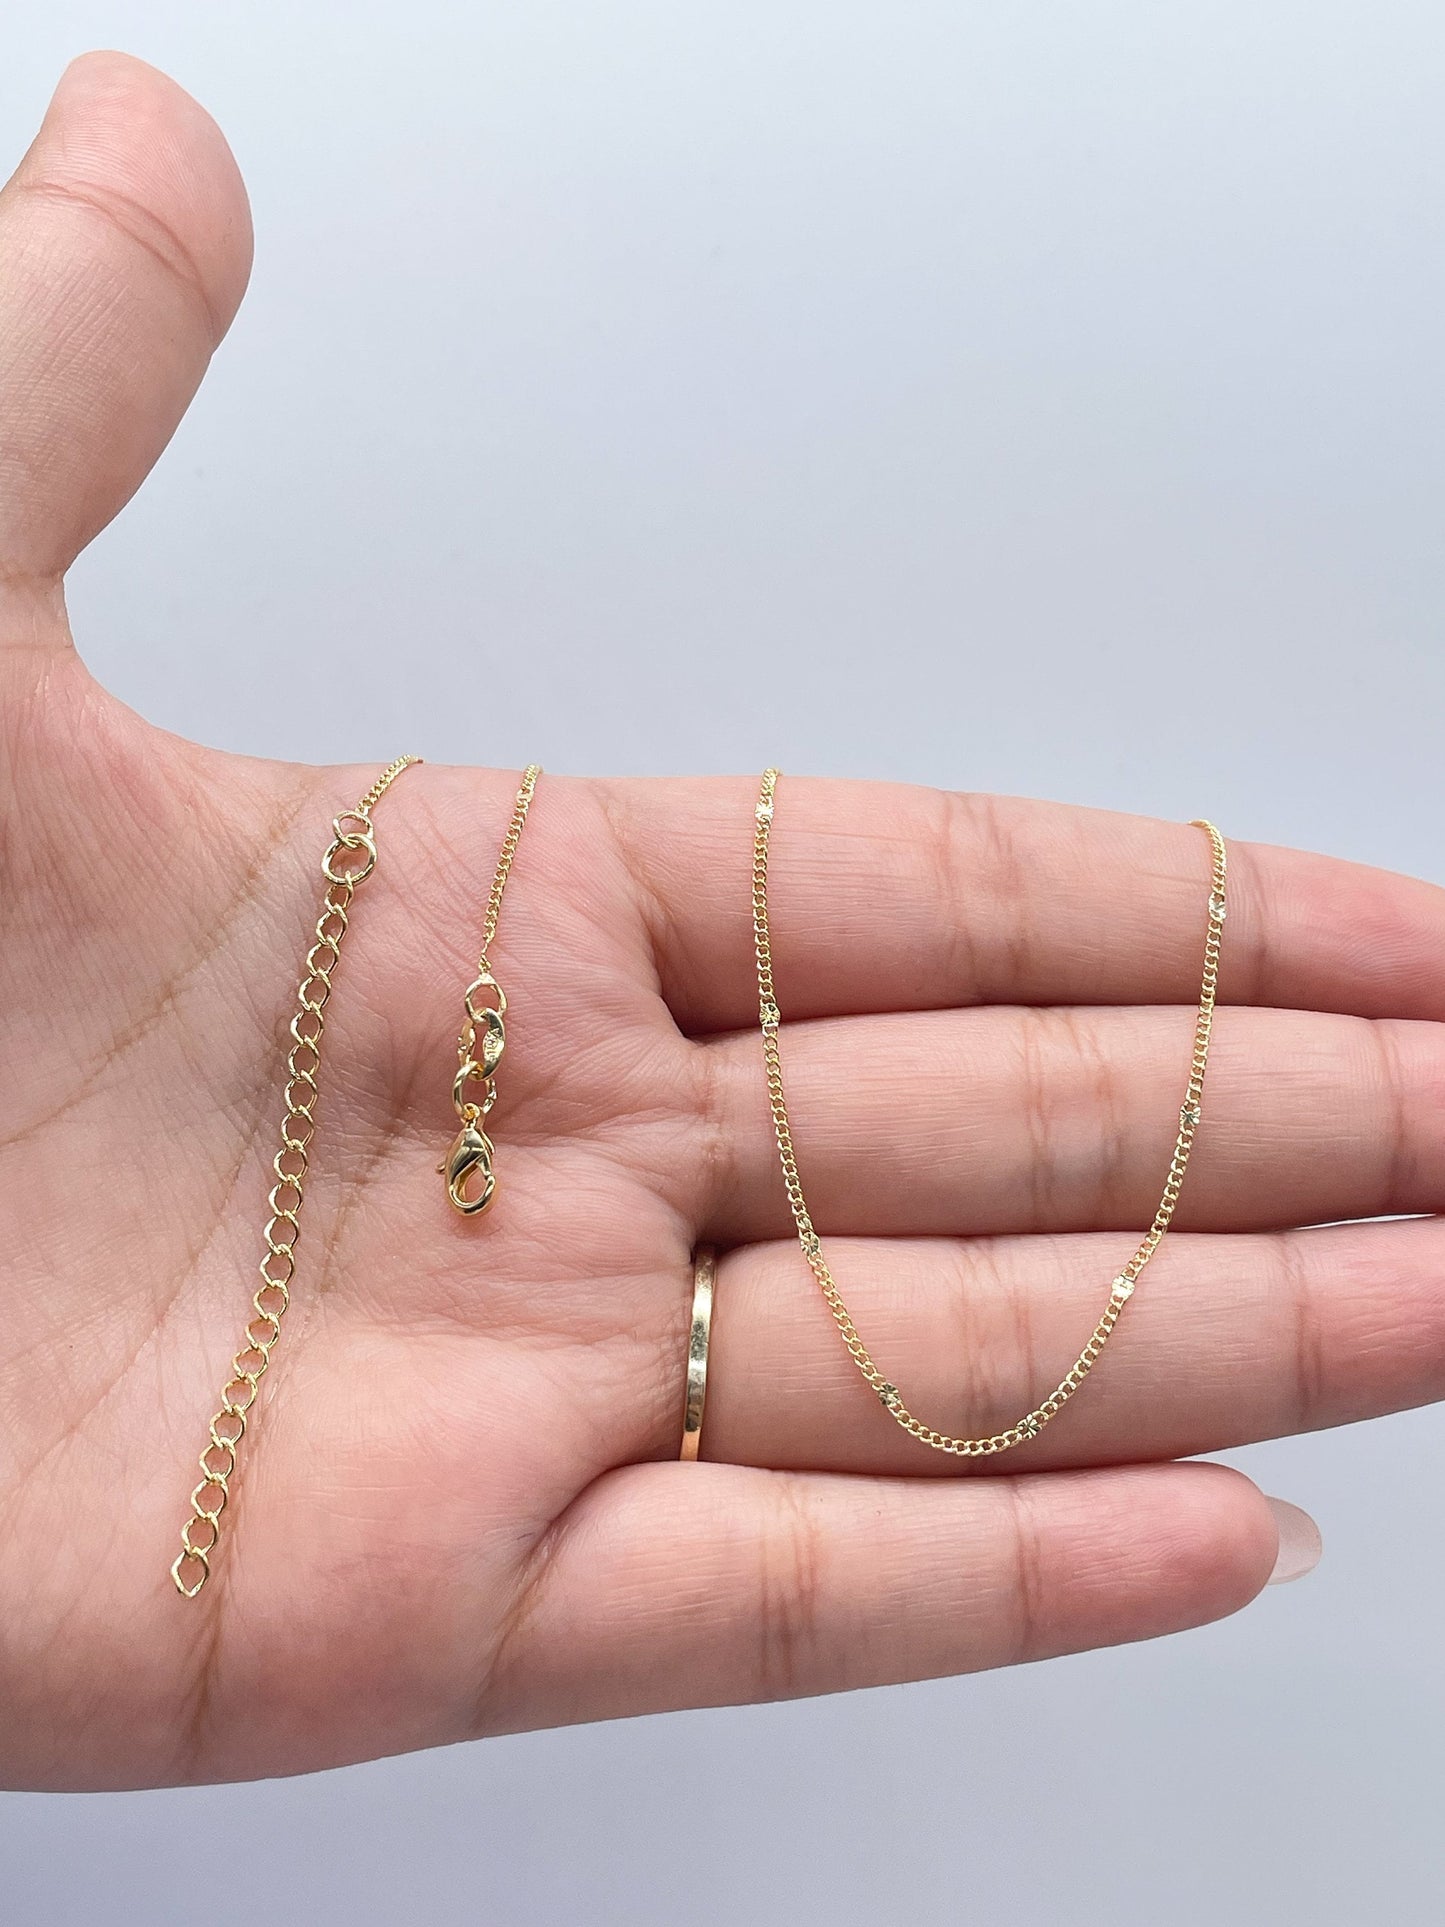 18k Gold Filled 16 Inch, 1mm Flat Sunburst-Stamped Sequin Satellite Curb Chain Necklace For Wholesale, Dainty Jewlery, Layering Necklace,